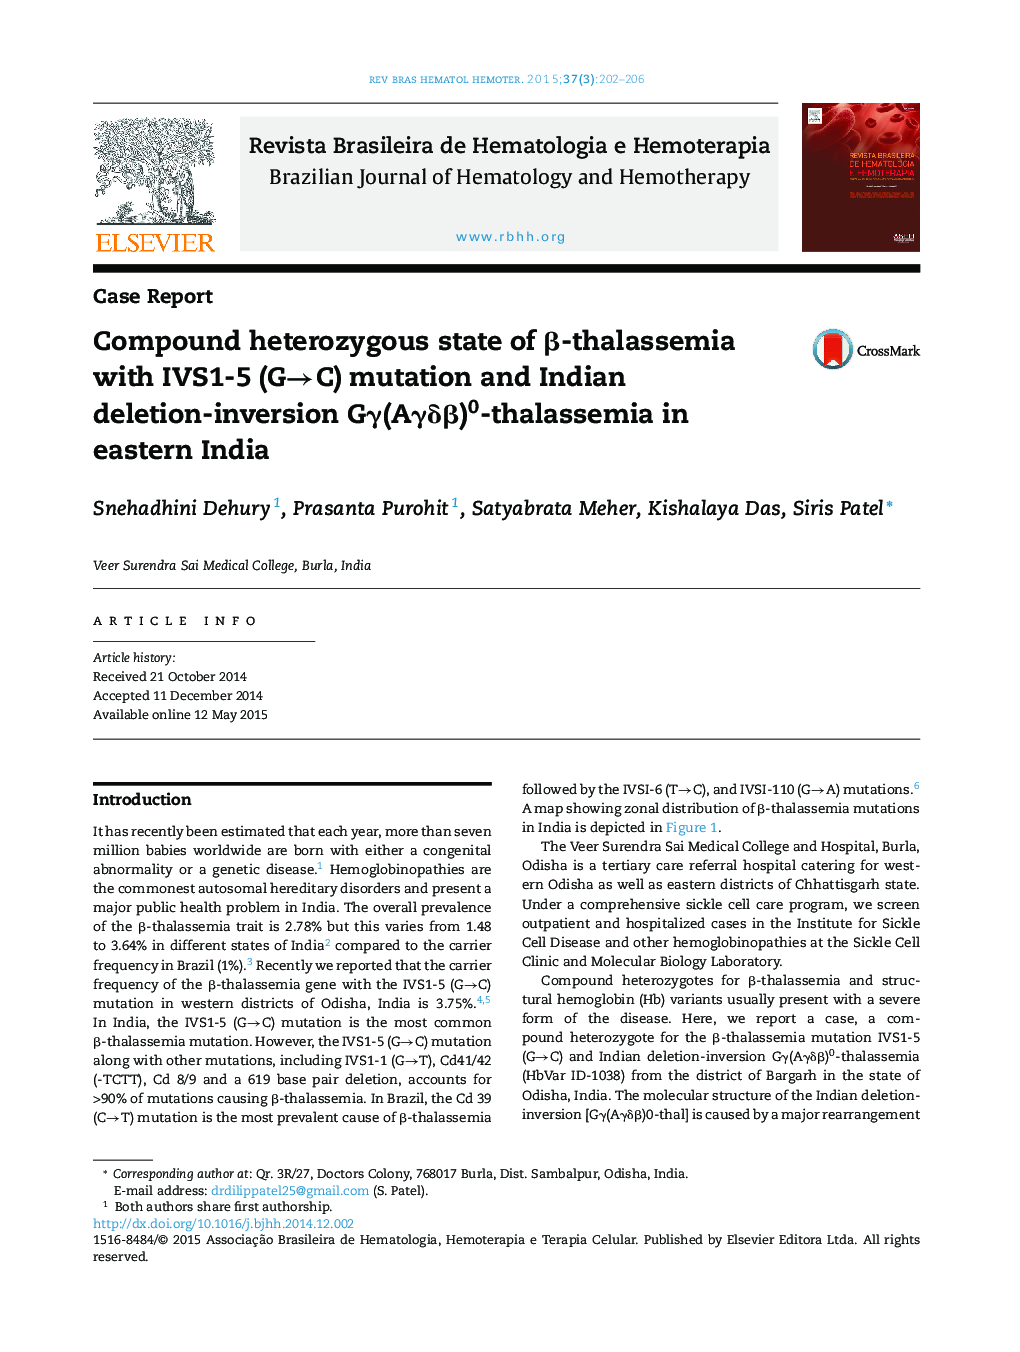 Compound heterozygous state of Î²-thalassemia with IVS1-5 (GâC) mutation and Indian deletion-inversion GÎ³(AÎ³Î´Î²)0-thalassemia in eastern India